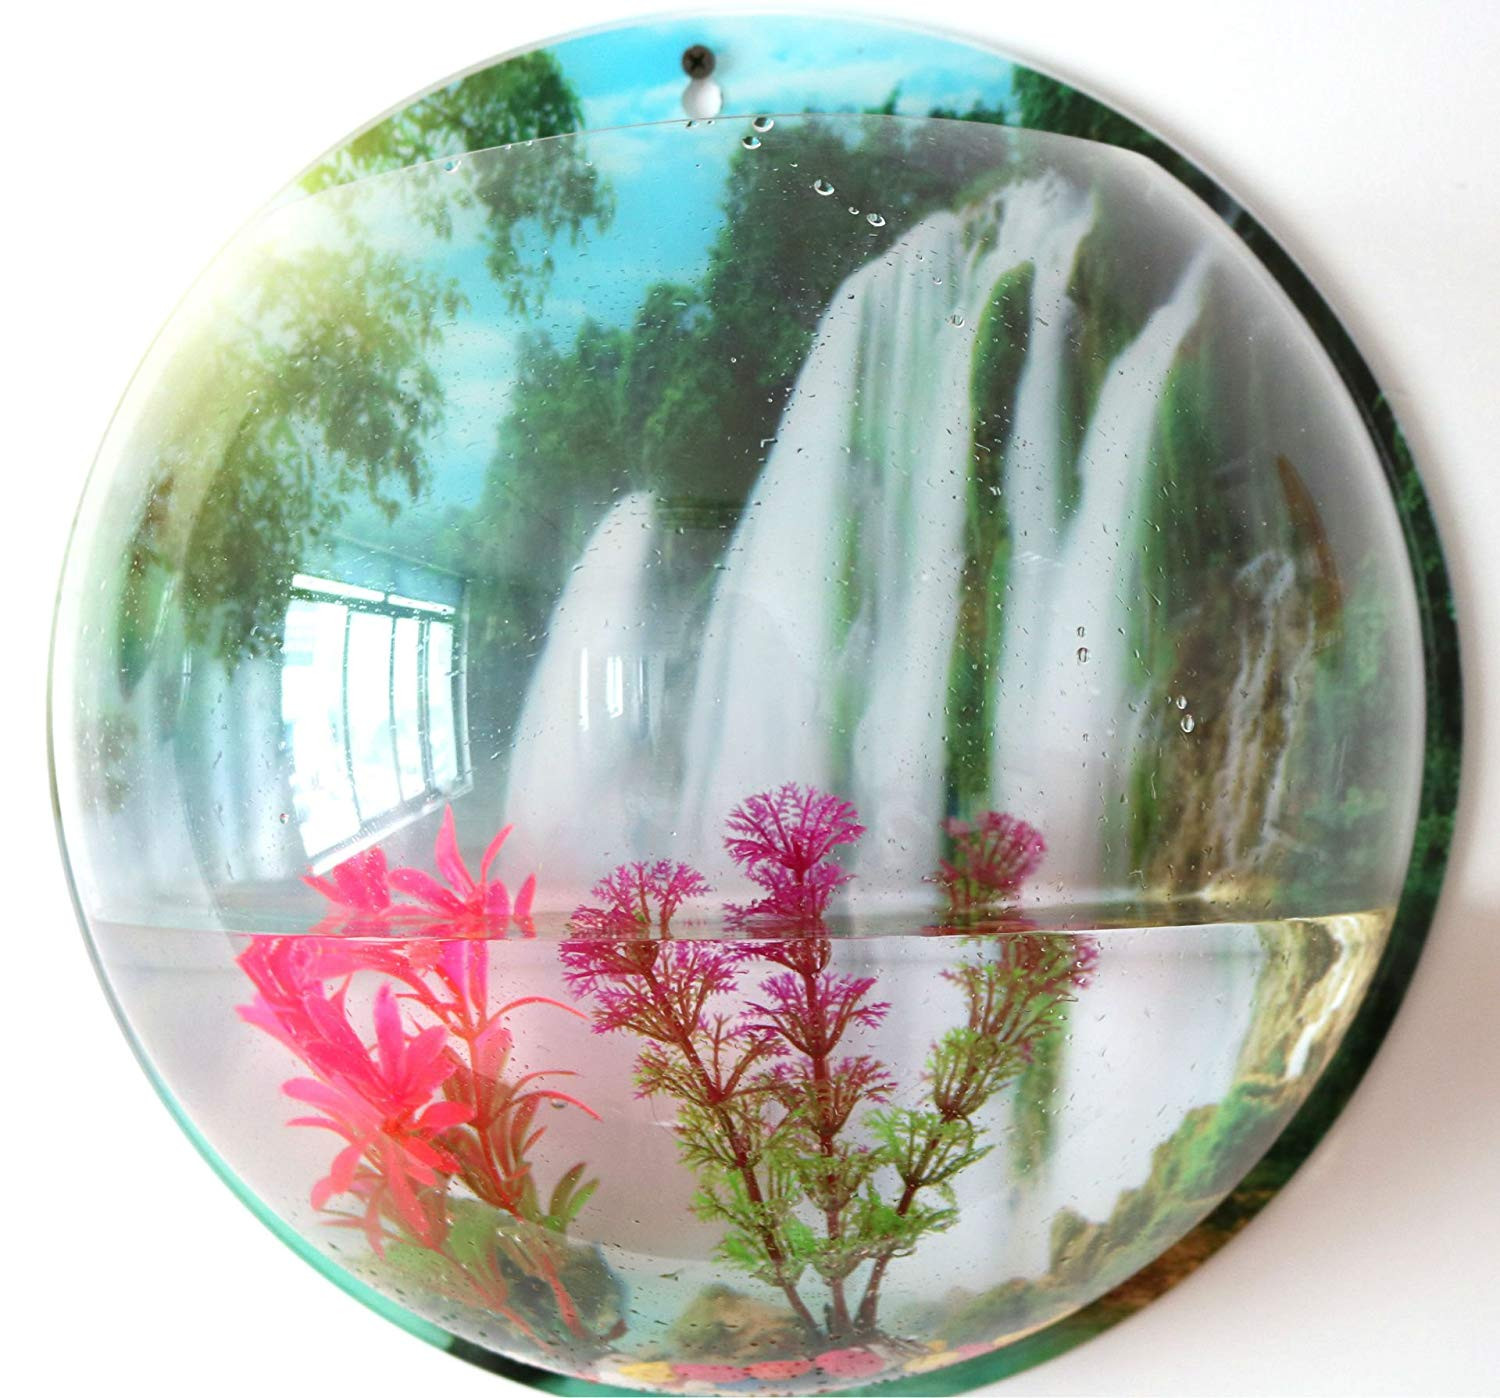 24 Lovable Glass Bubble Fish Bowl Vase 2024 free download glass bubble fish bowl vase of amazon com waterfall creative acrylic hanging wall mount fish tank intended for amazon com waterfall creative acrylic hanging wall mount fish tank bowl vase aq